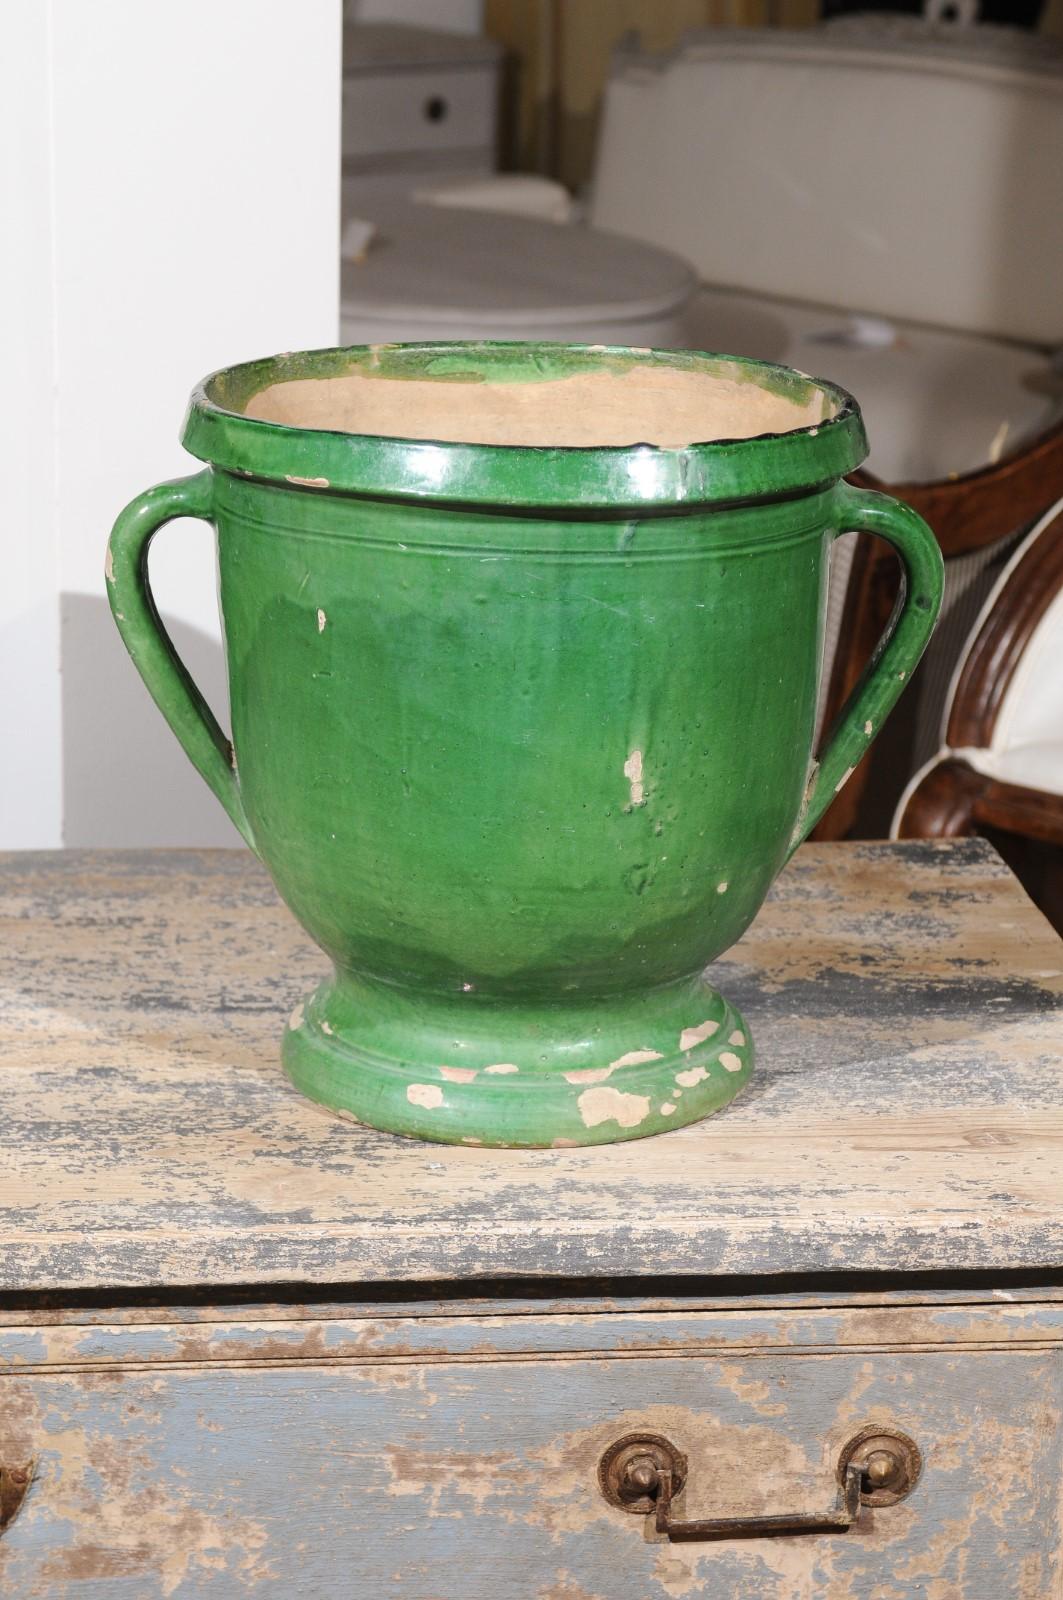 A French green glazed pottery jardinière from the mid-19th century, with lateral handles. Born in France during the reign of emperor Napoleon III, this charming jardinière planter features a green glazed body presenting a nicely weathered